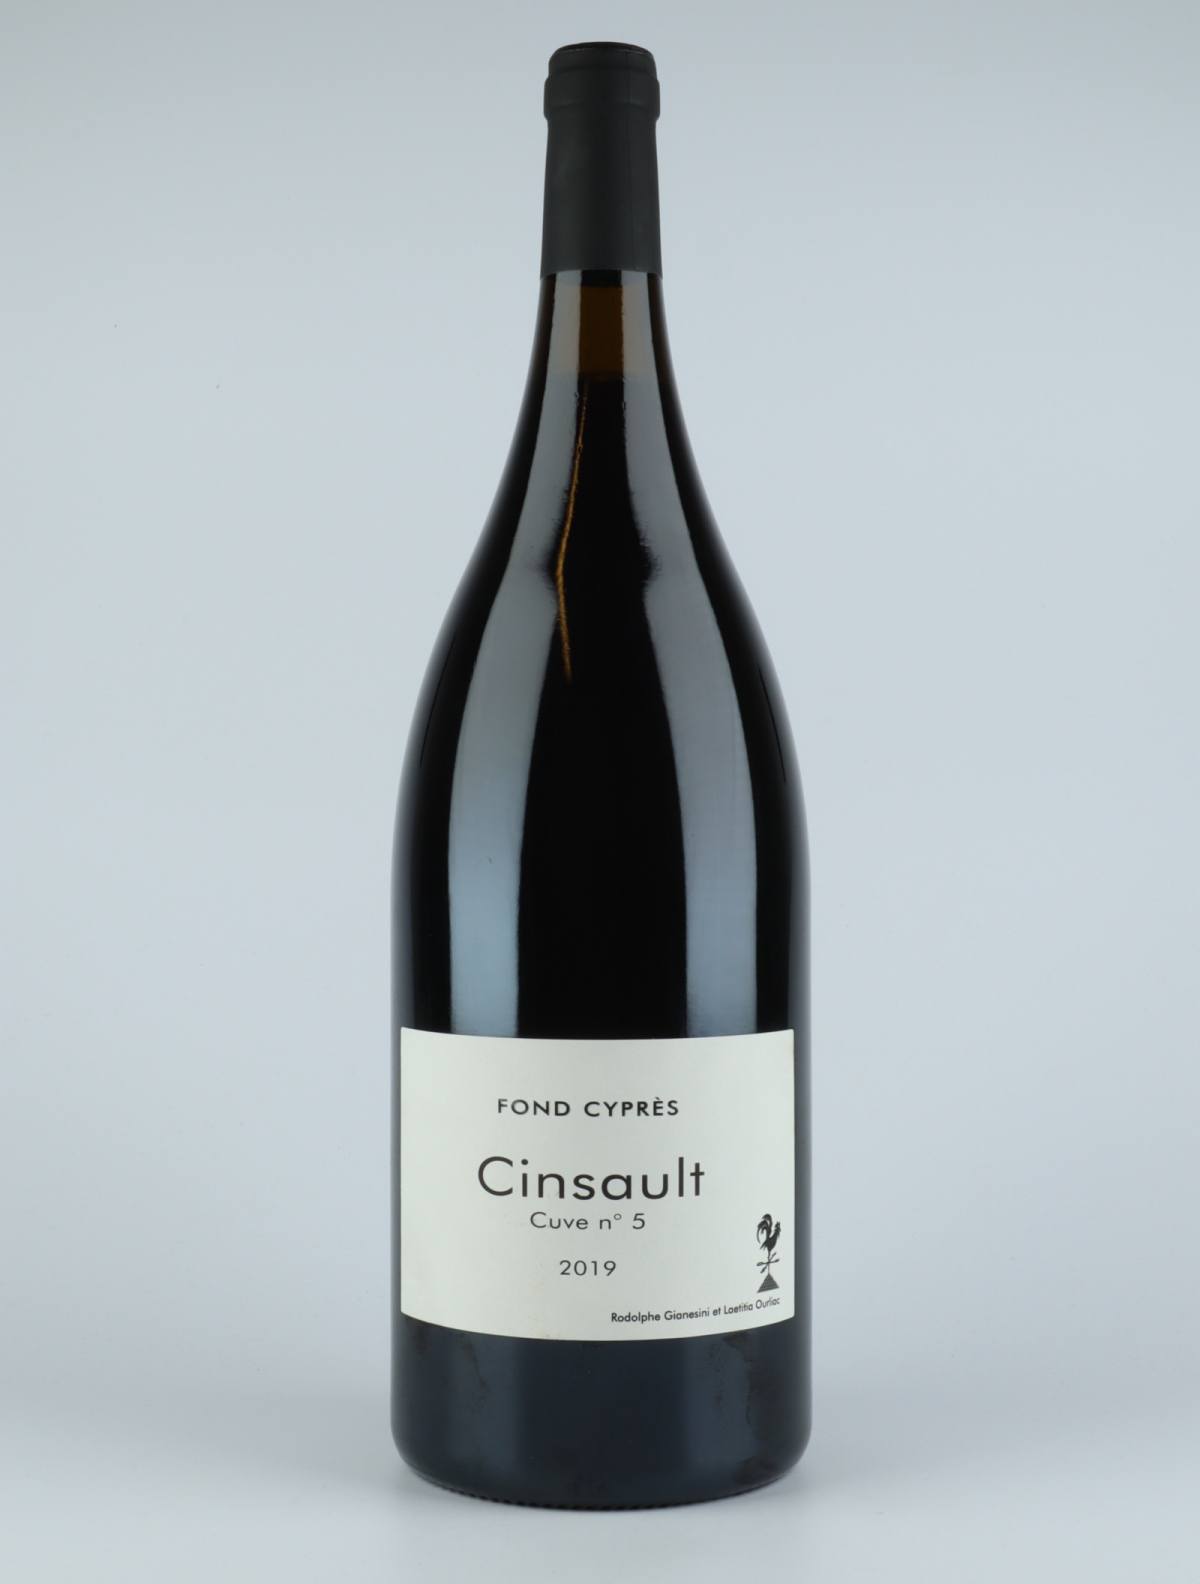 A bottle 2019 Cinsault Cuve No. 5 Red wine from Fond Cyprès, Languedoc in France